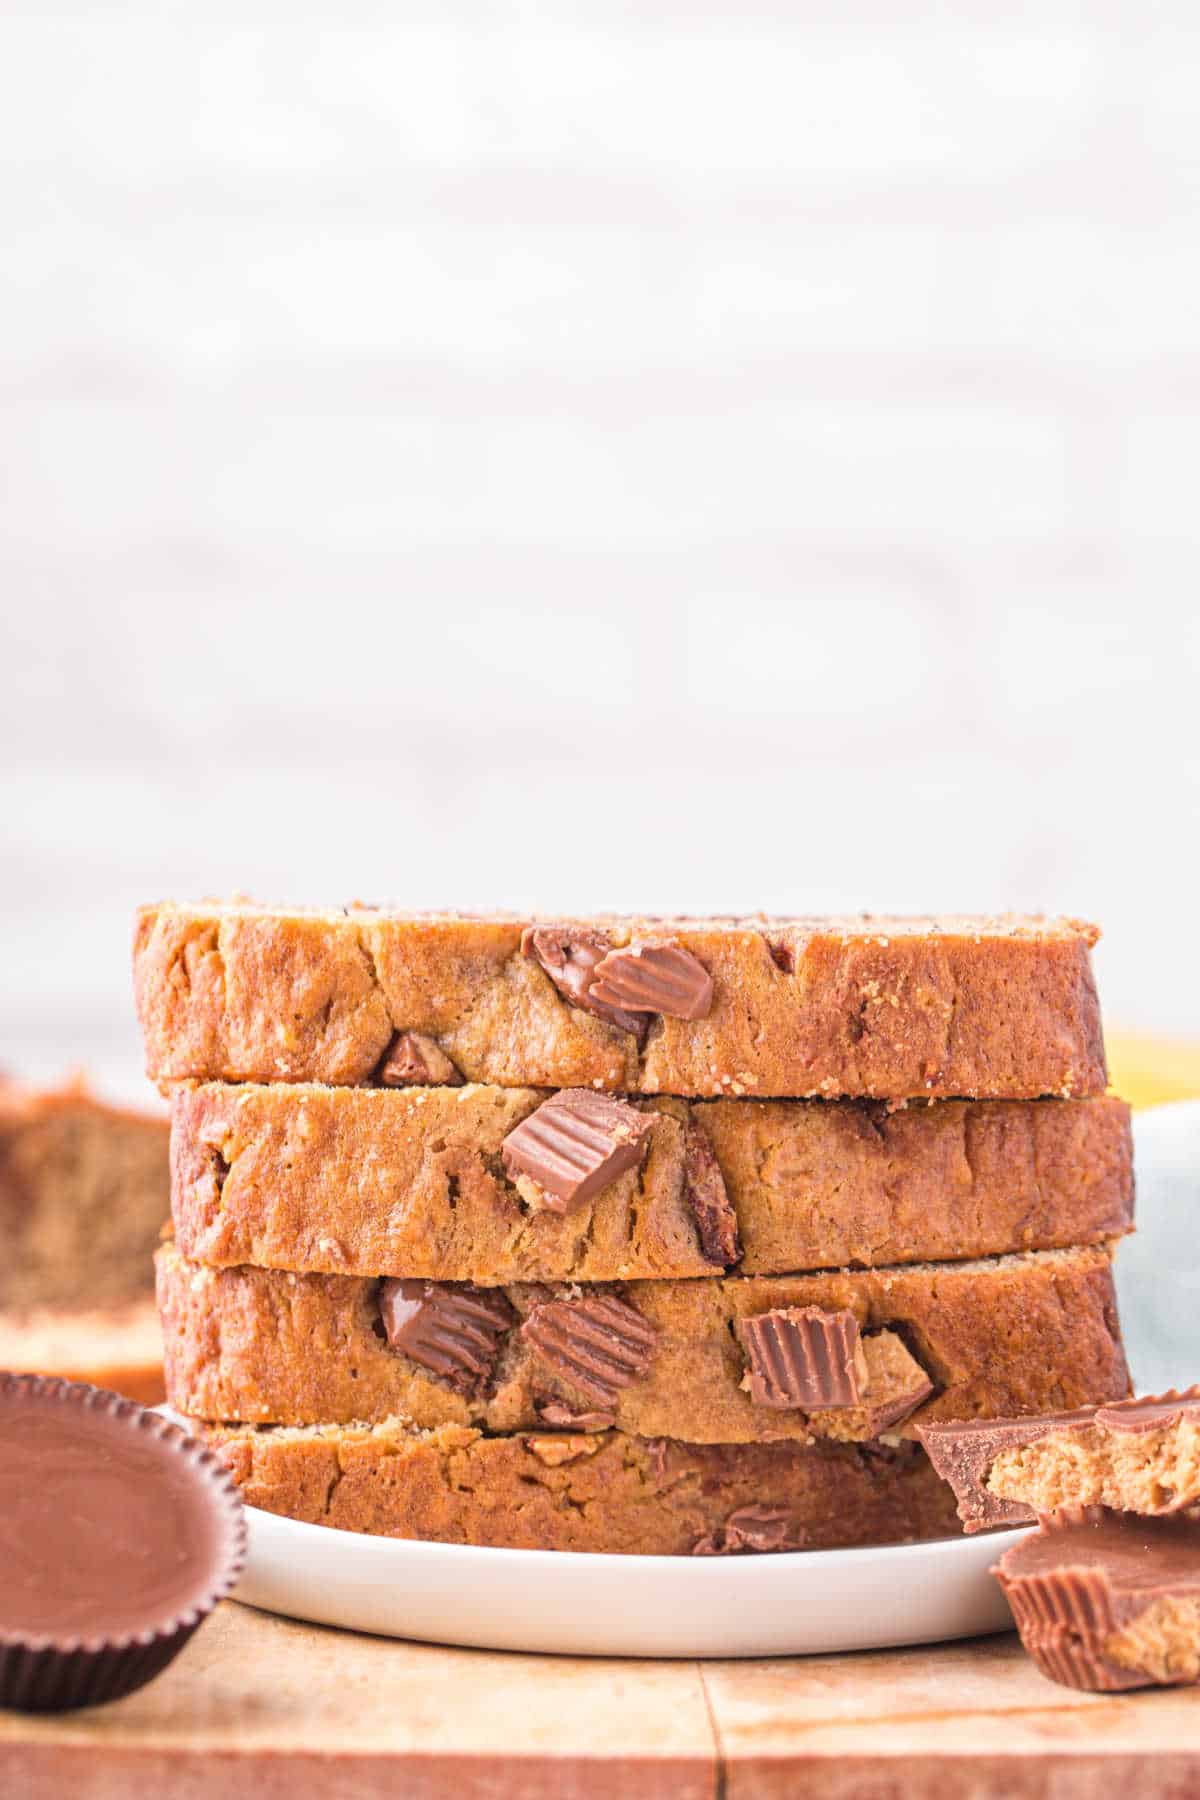 A stack of Reese's peanut butter banana bread slices on a plate.